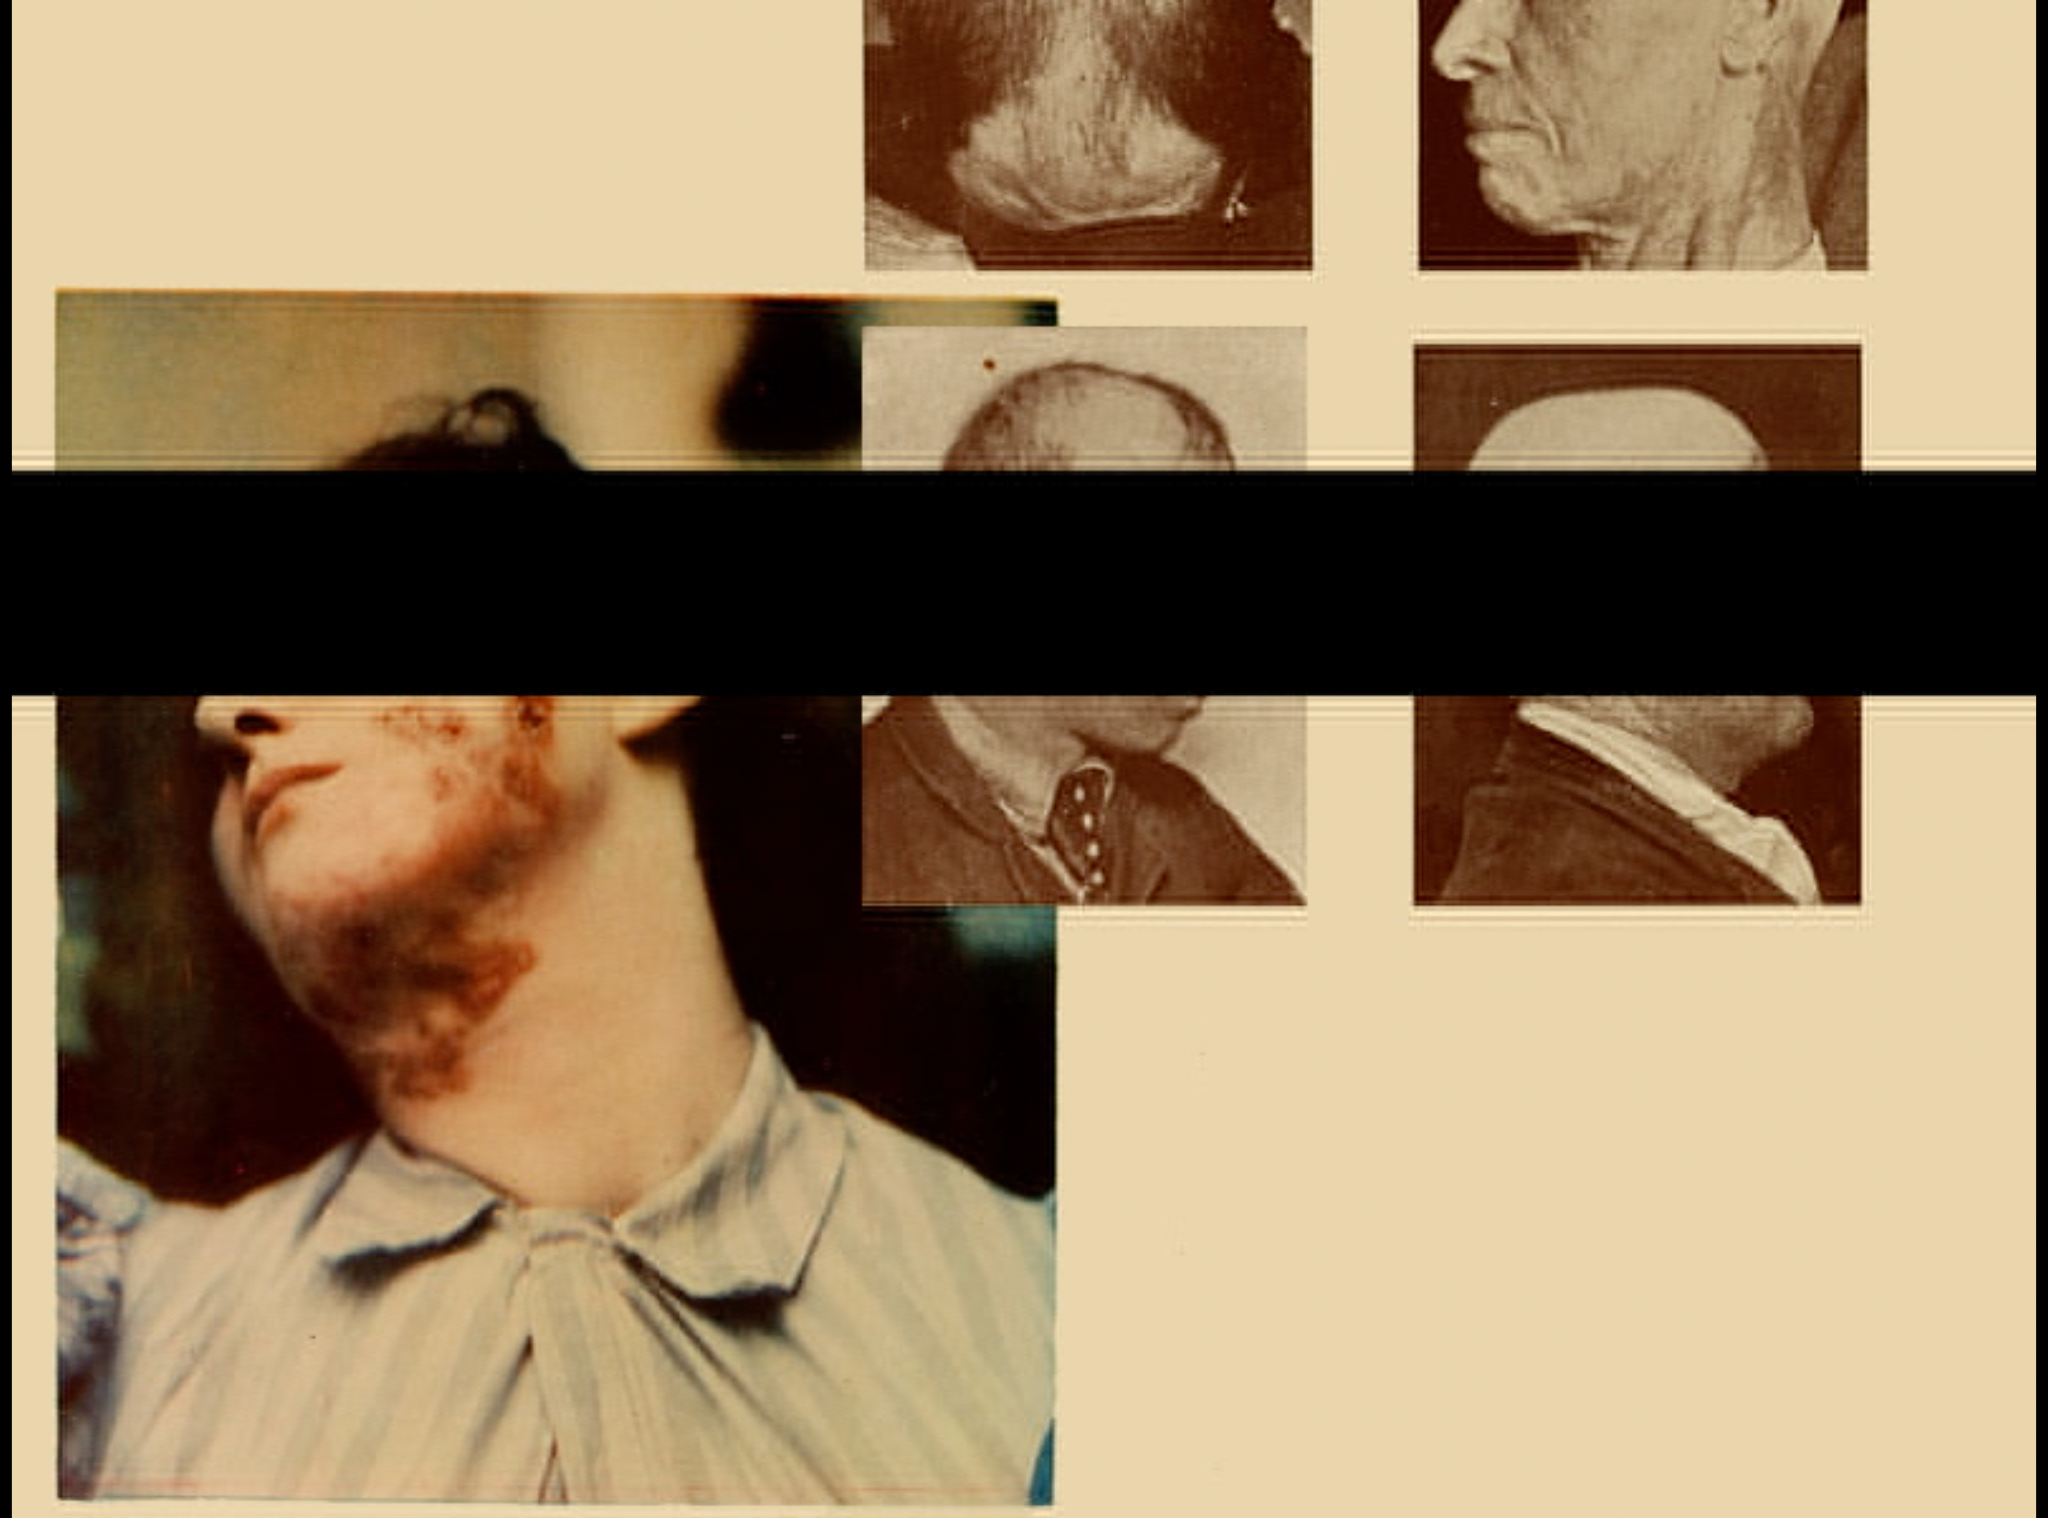 Purcell figure 7. One large photo in color shows an individual with a skin condition on their neck and face; their eyes are obscured by a black bar. Four smaller black and white photos are arranged in a grid at the top, two of which are also obscured by the same black bar